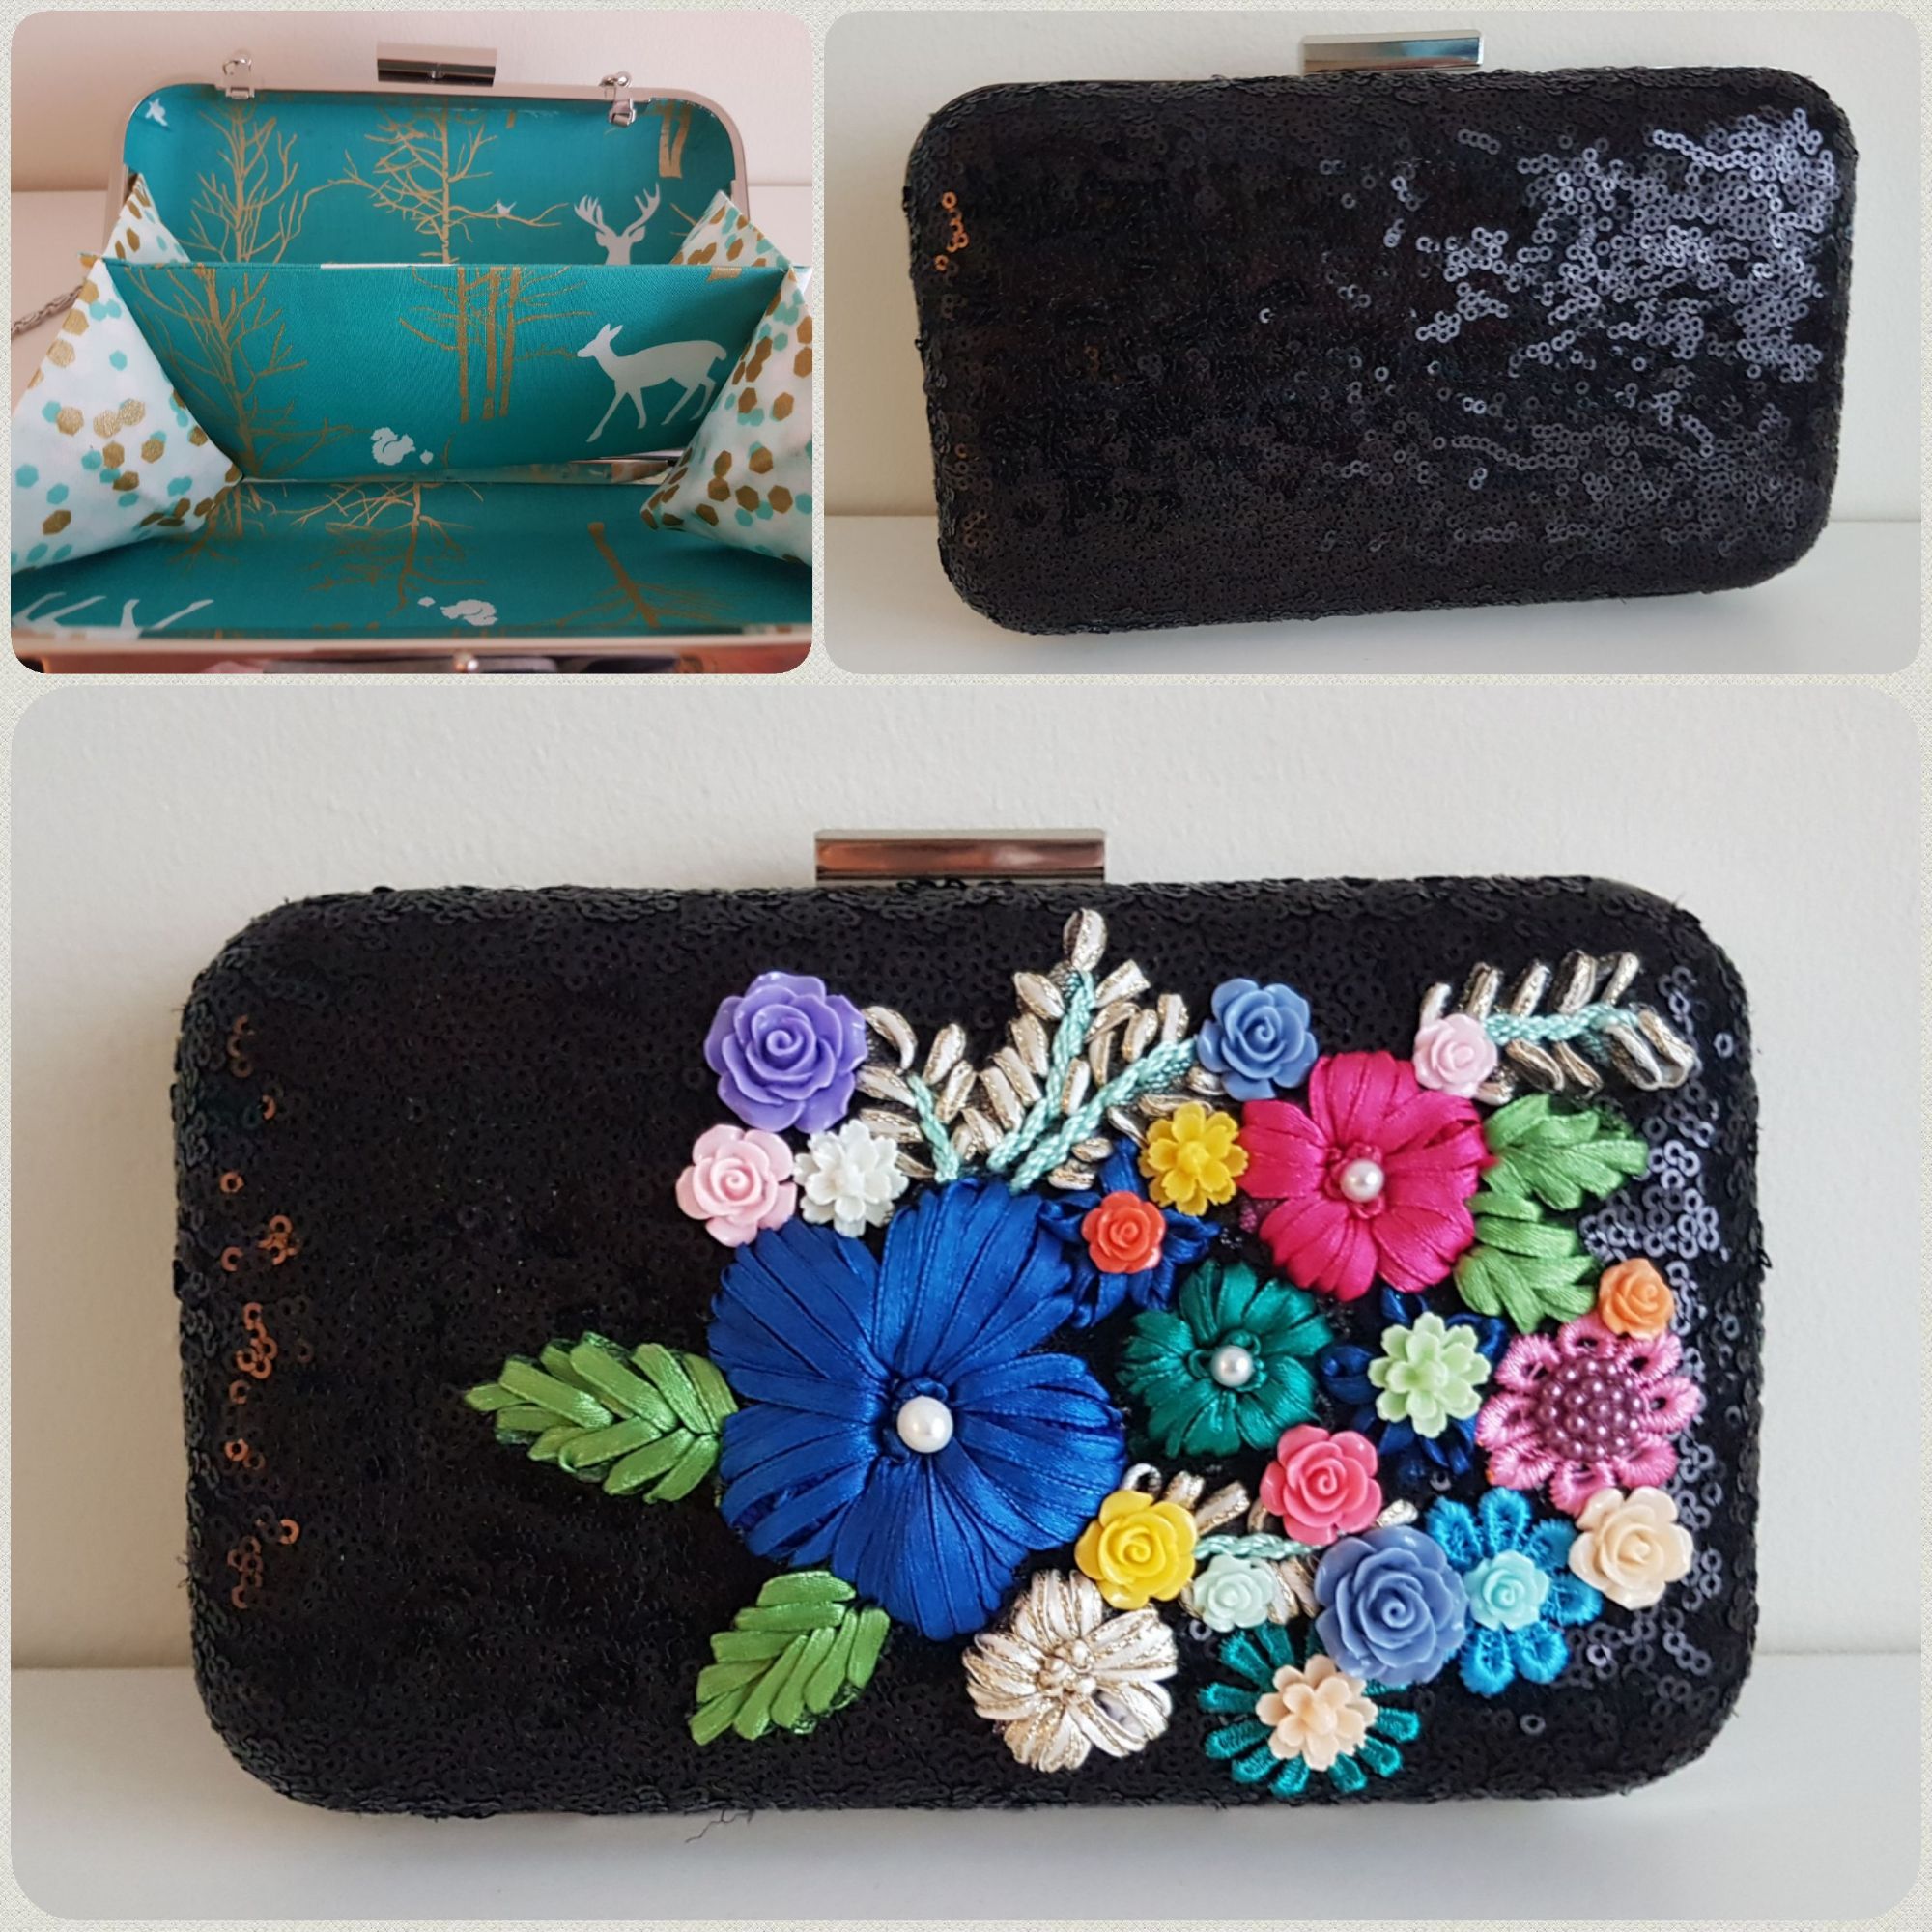 Black sequin & floral handmade, Gucci inspired clutch bag